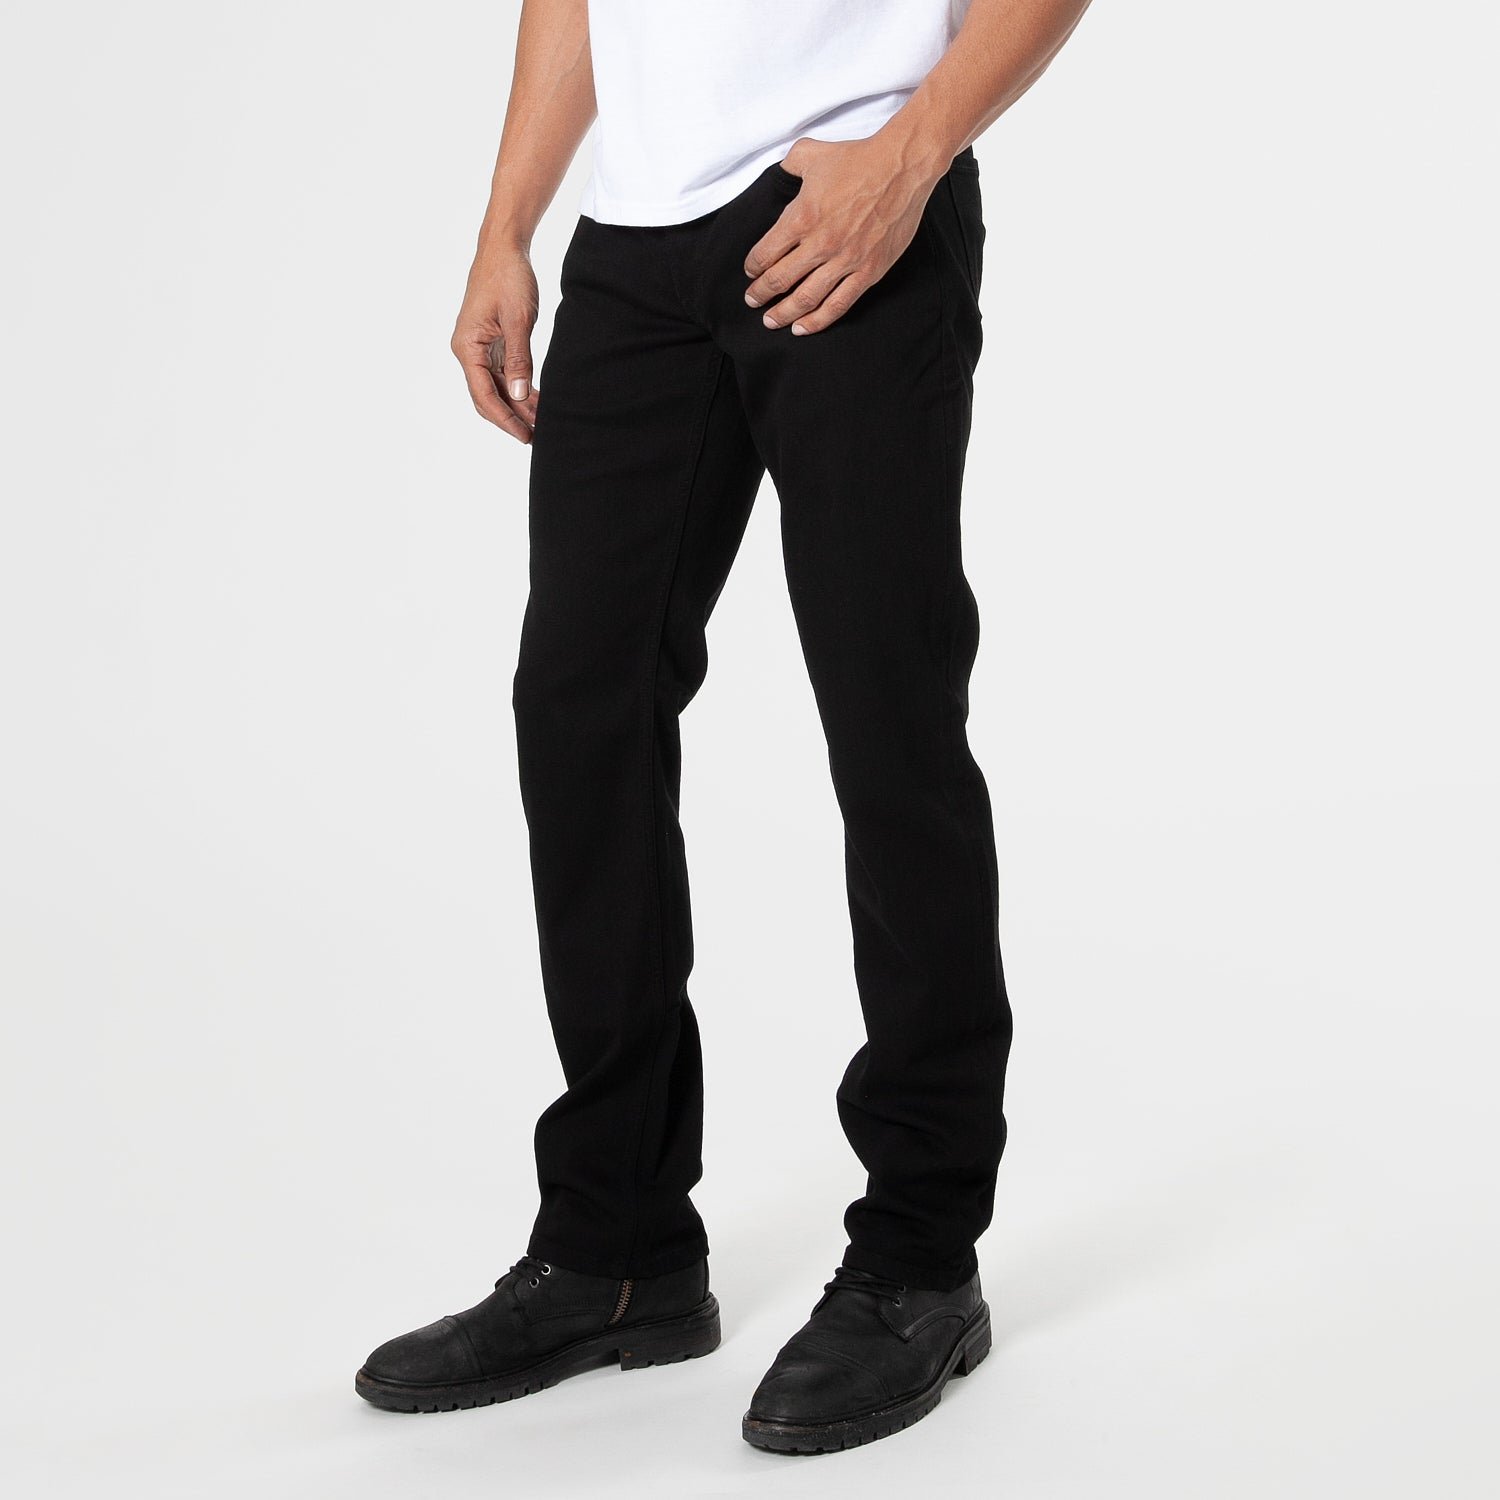 Straight Fit Indigo and Black Comfort Jeans 2-Pack